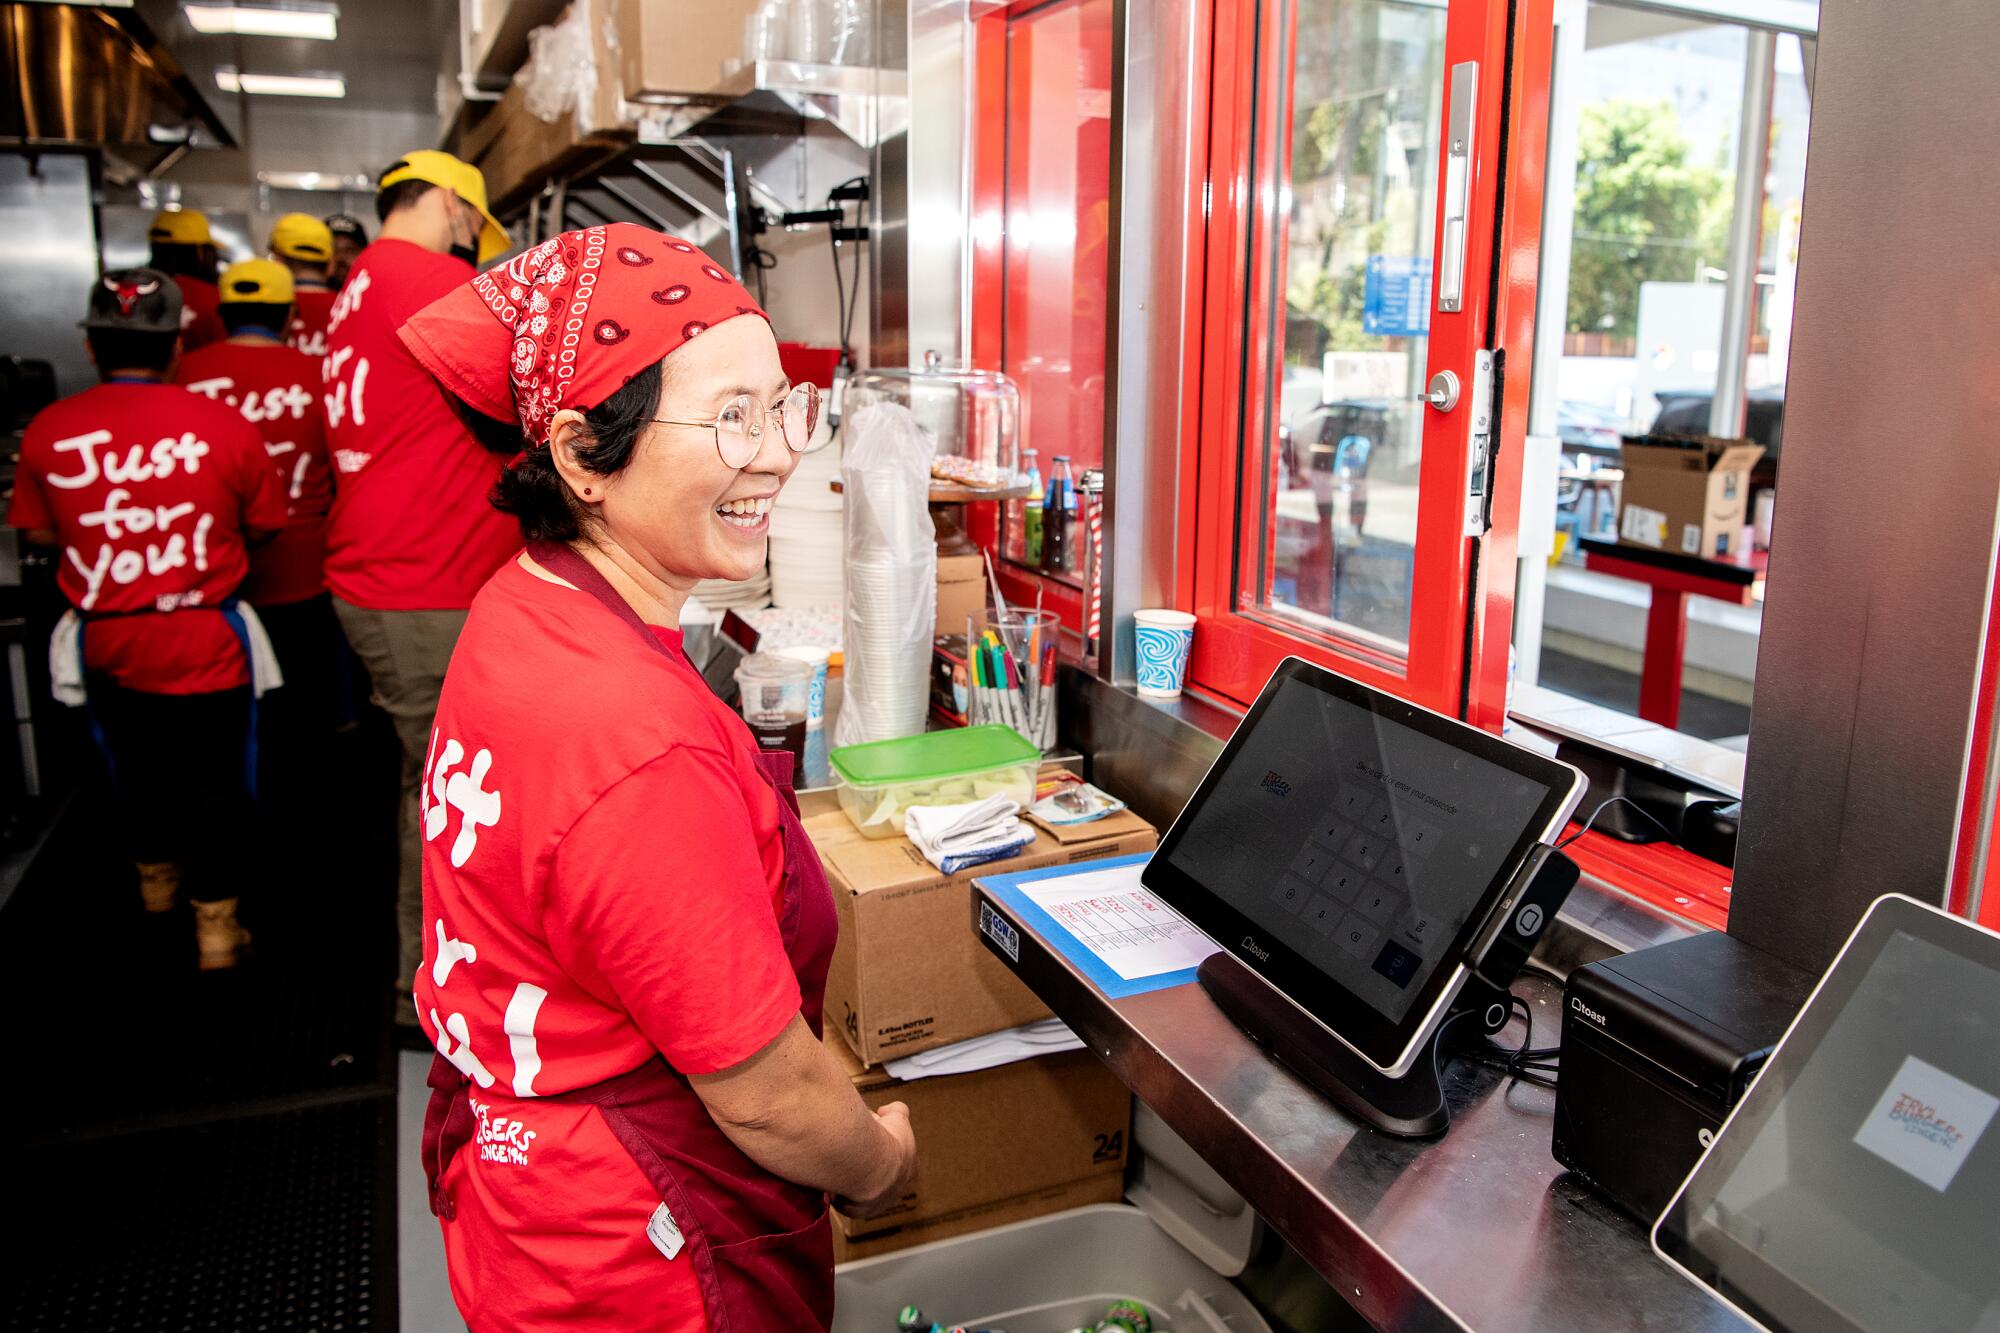 A woman in a red T-shirt and headscarf smiles at guests from behind the register at a hamburger stand.